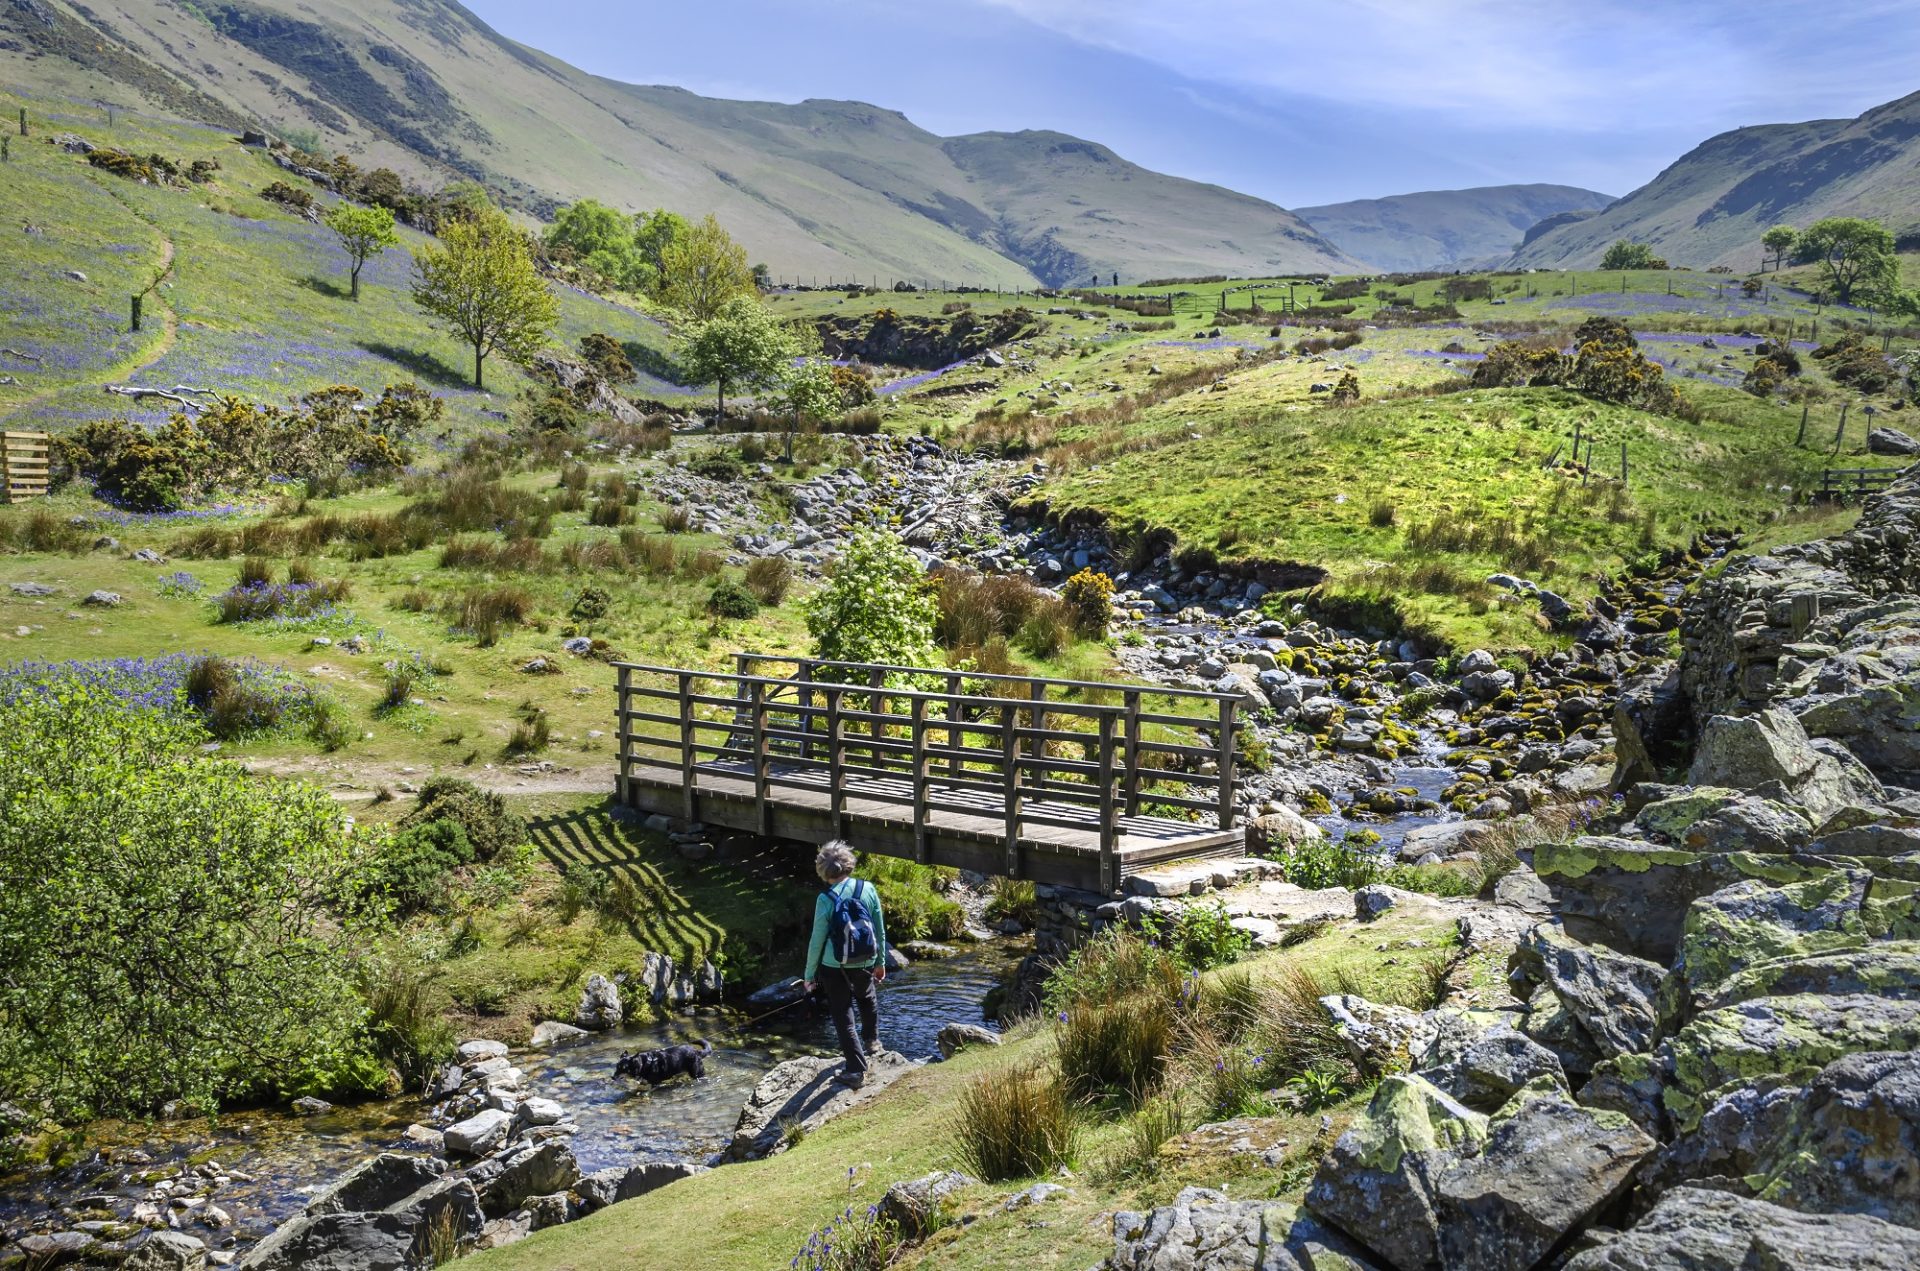 A Hiker Taking A Brake By The Stream Whiles Walking The Hills In